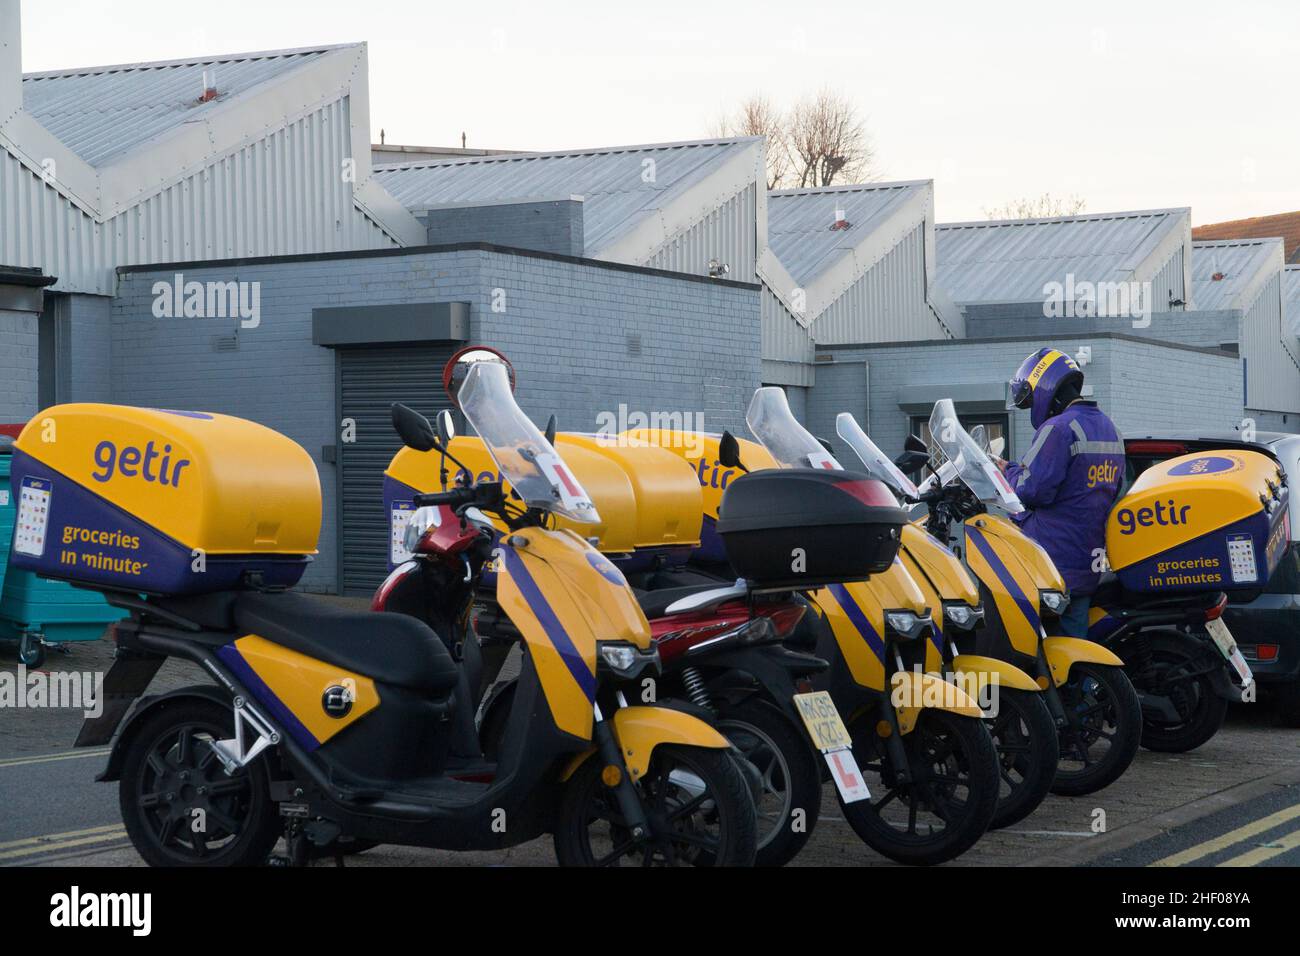 London, UK, 12 January 2022: mopeds belonging to the grocery delivery company Getir outside one of their fulfilment centres on an industrial estate in Clapham. Anna Watson/Alamy Stock Photo